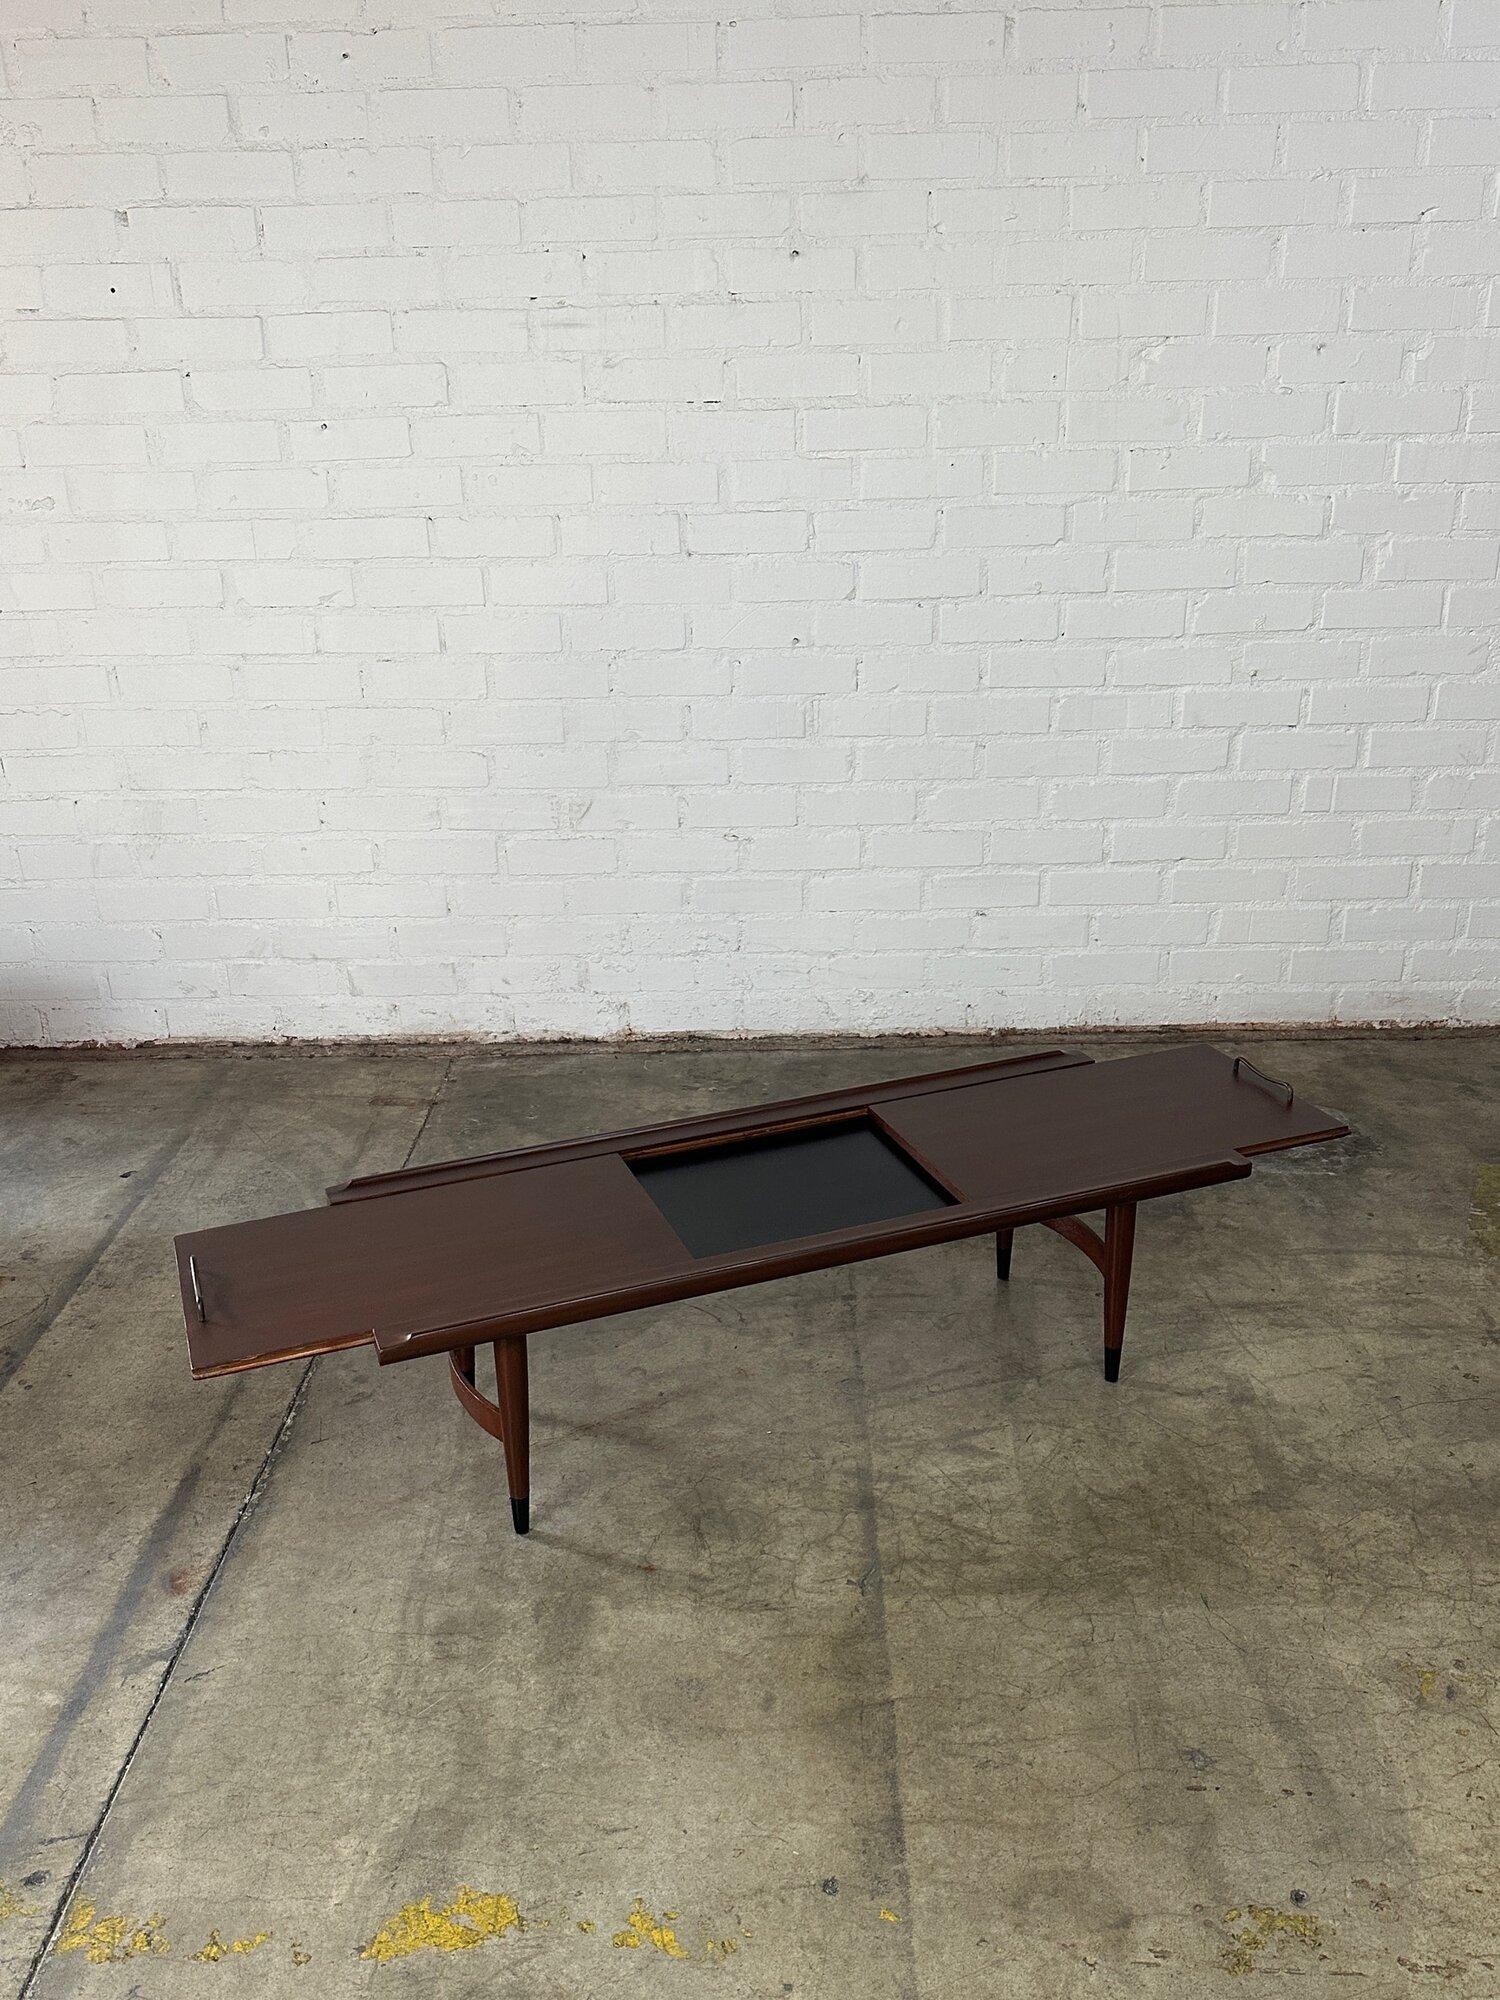 W52 D19 H16 Open W69.5

Fully restored coffee table finished in a dark walnut. Item is structurally sound and opens to reveal a durable laminate center. Item has nice raised edges and curved leg stretchers. Coffee table has original hardware and